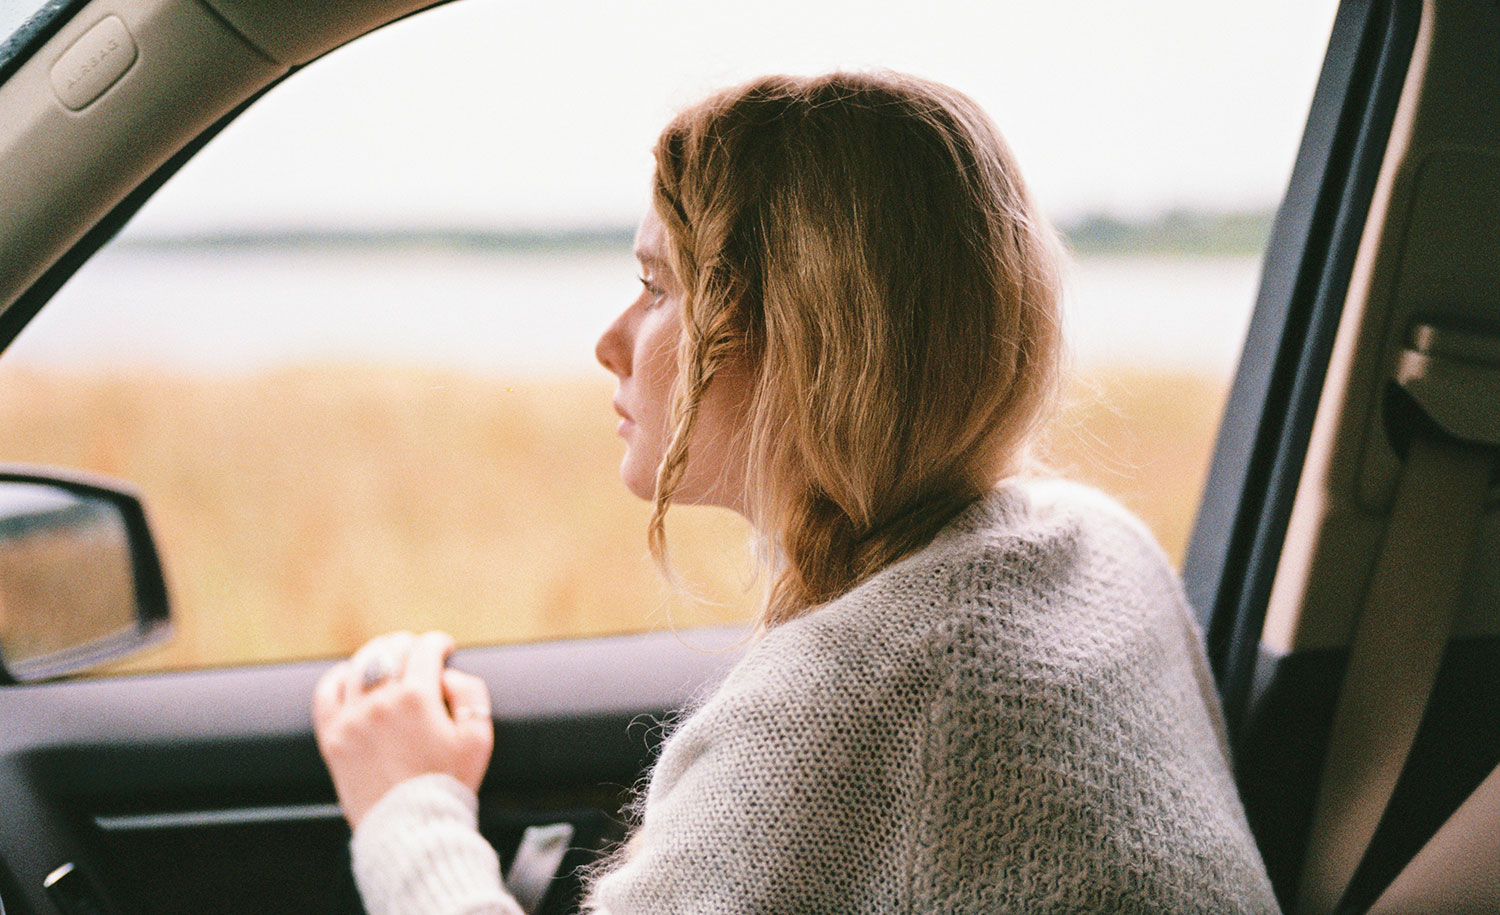 A pensive woman looks out a car window